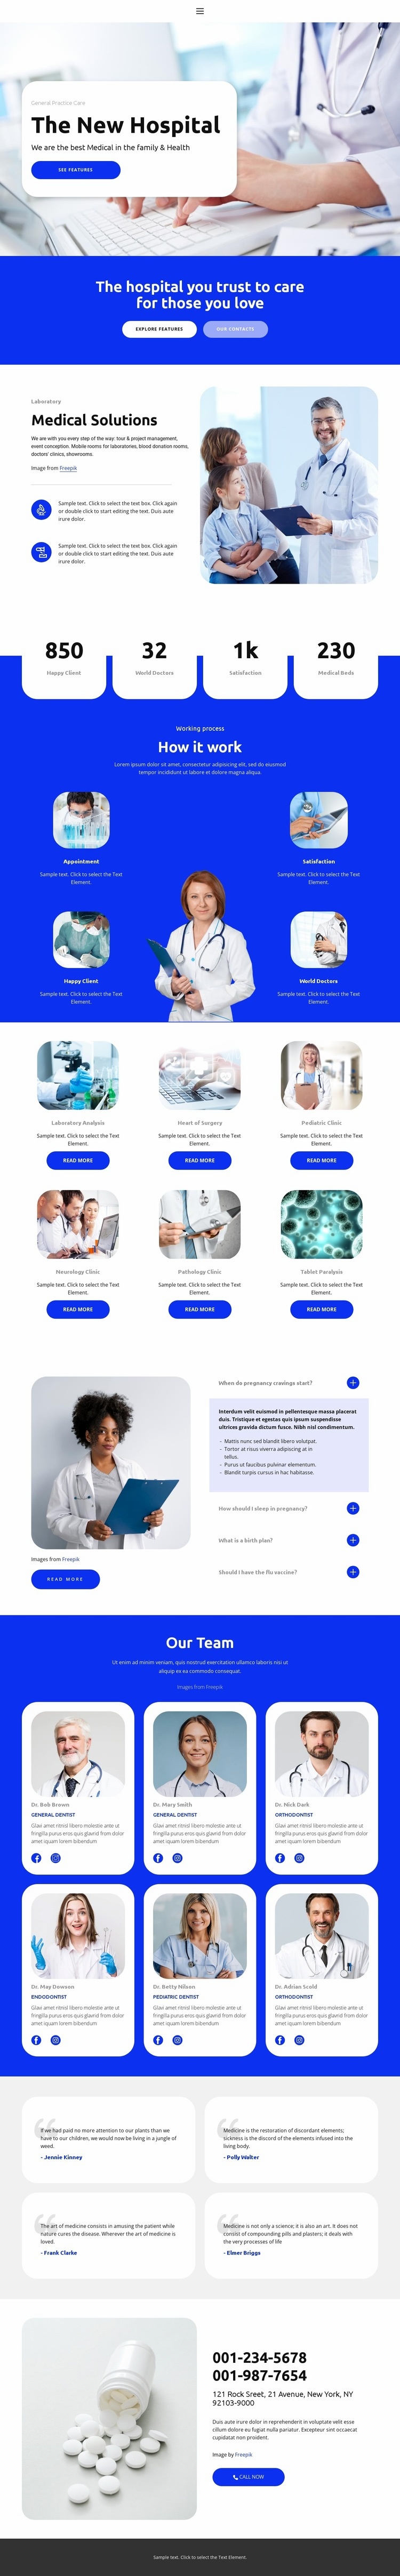 The New Hospital Homepage Design